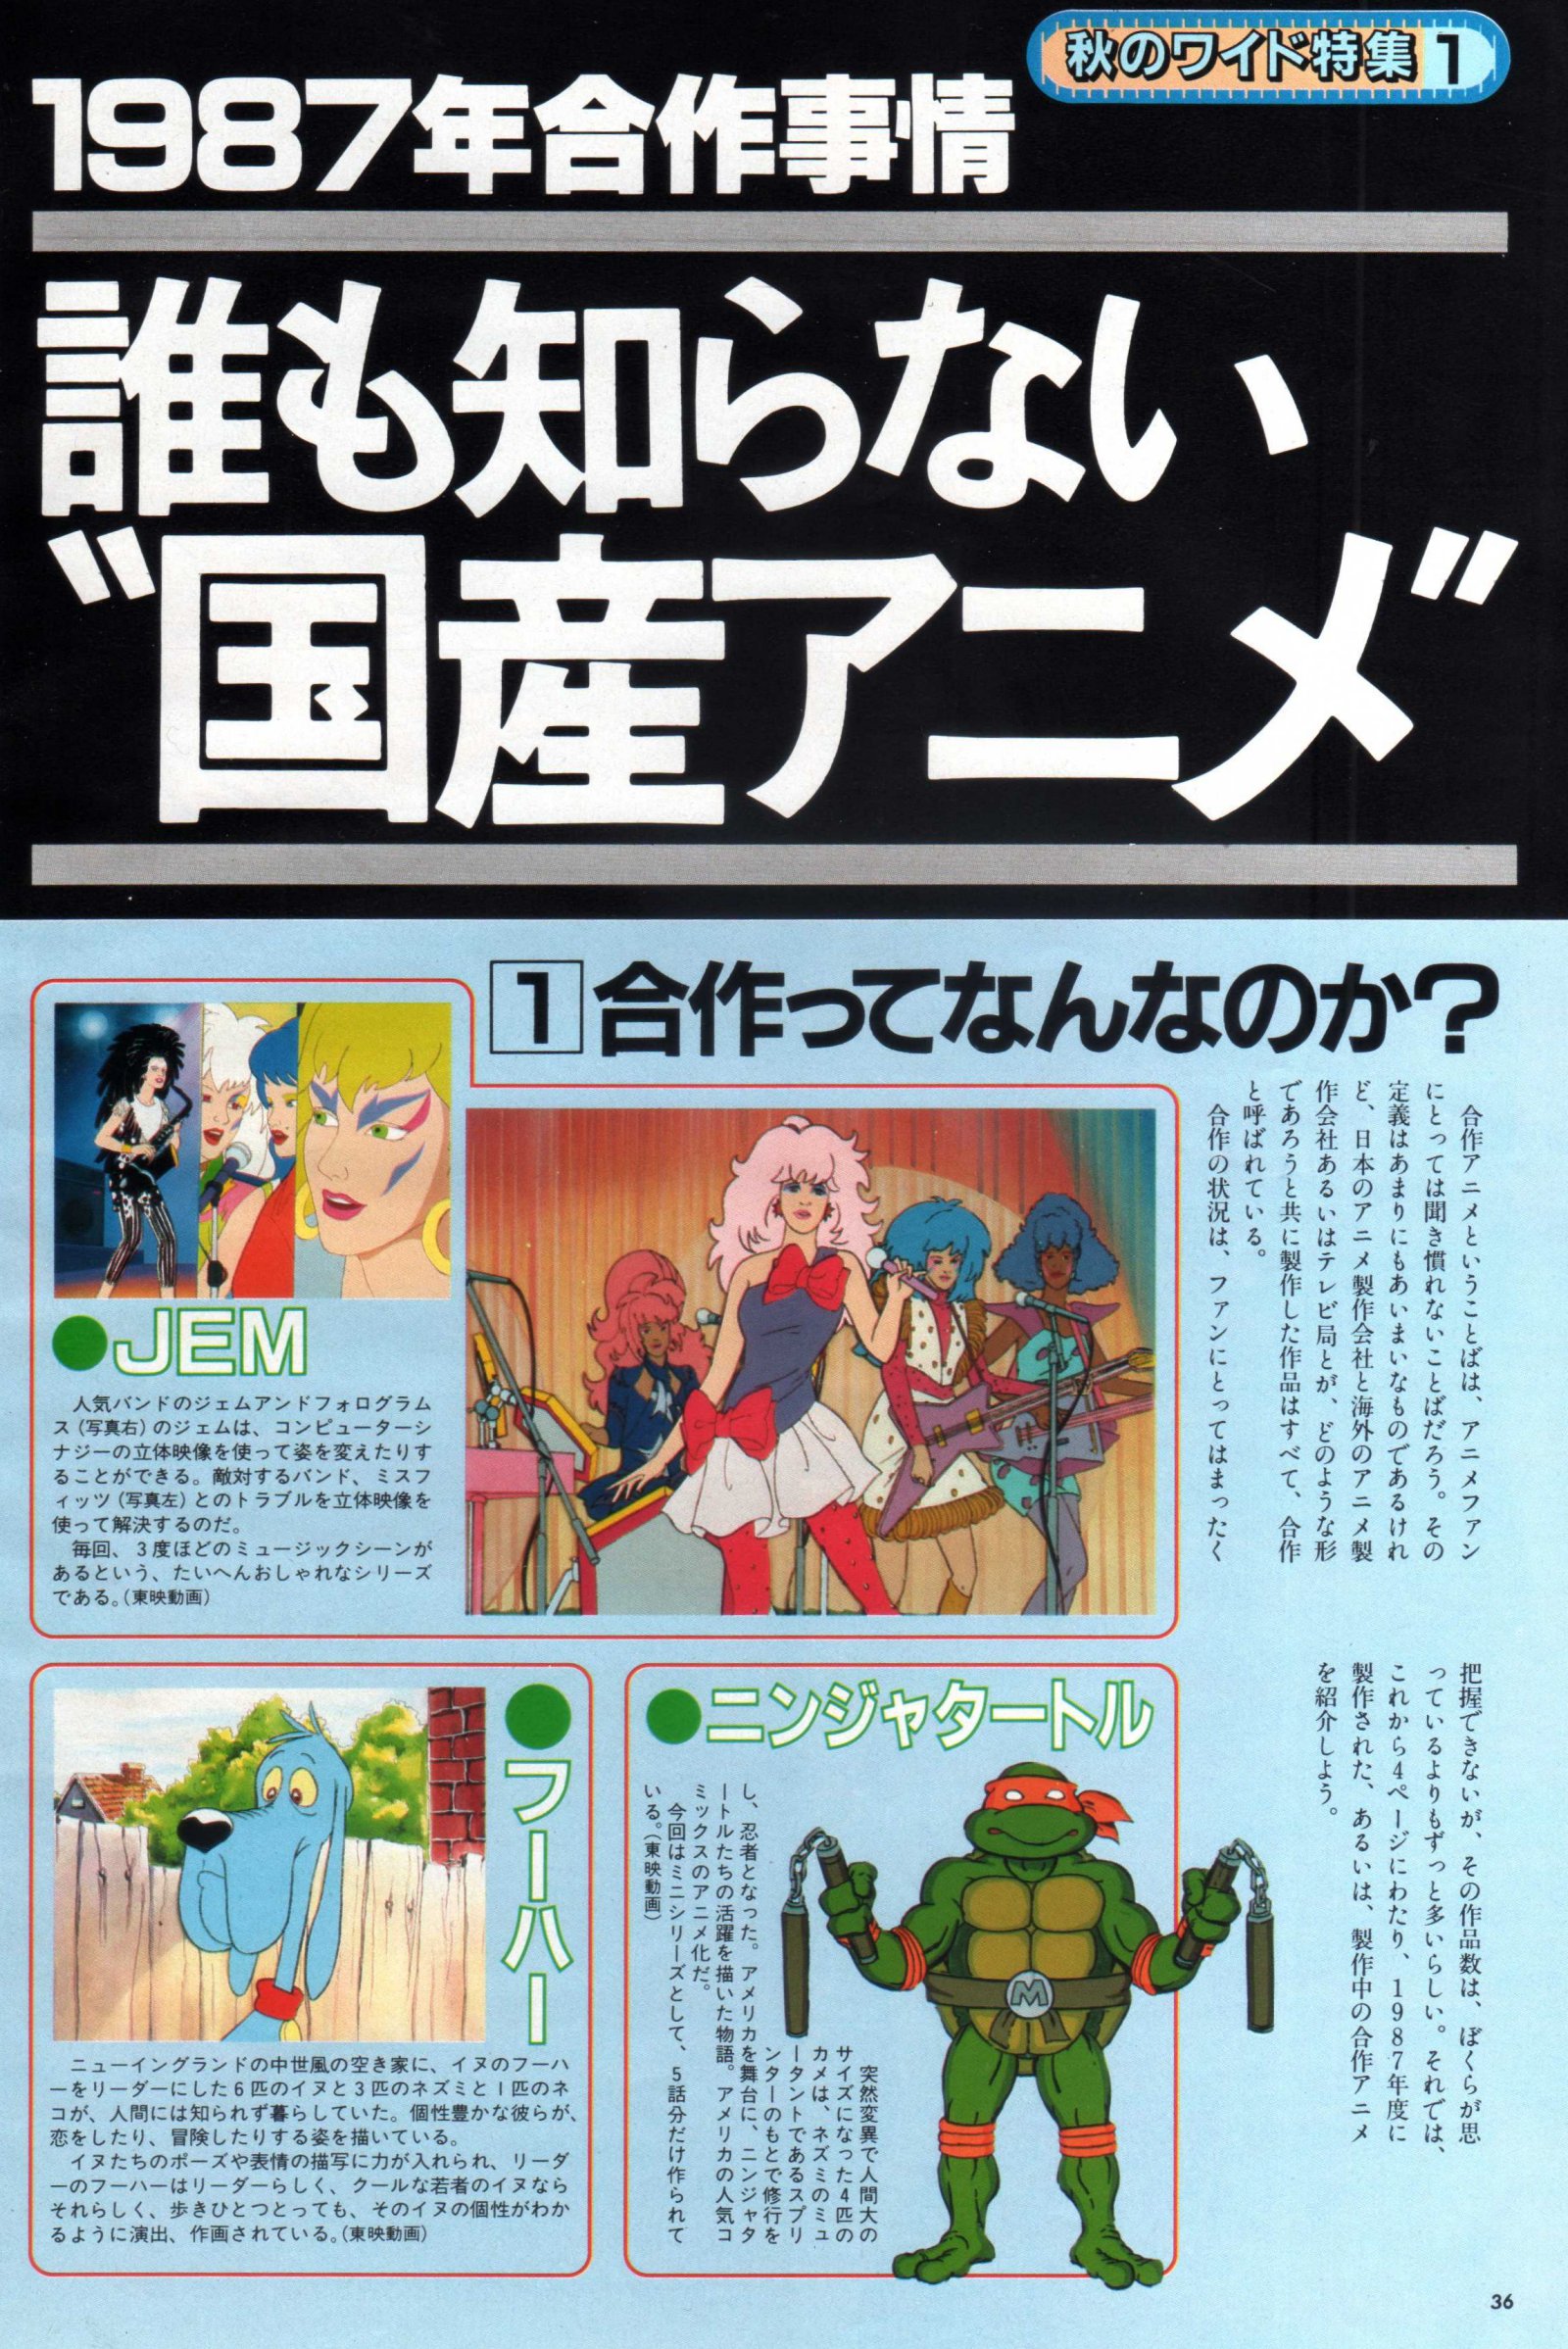 Animarchive International Projects And Co Productions Between Western Countries And Japan Western Animated Series Were Frequently Outsourced To Japanese Studios During The 80s Animage 11 1987 T Co Ctoajnbbde T Co